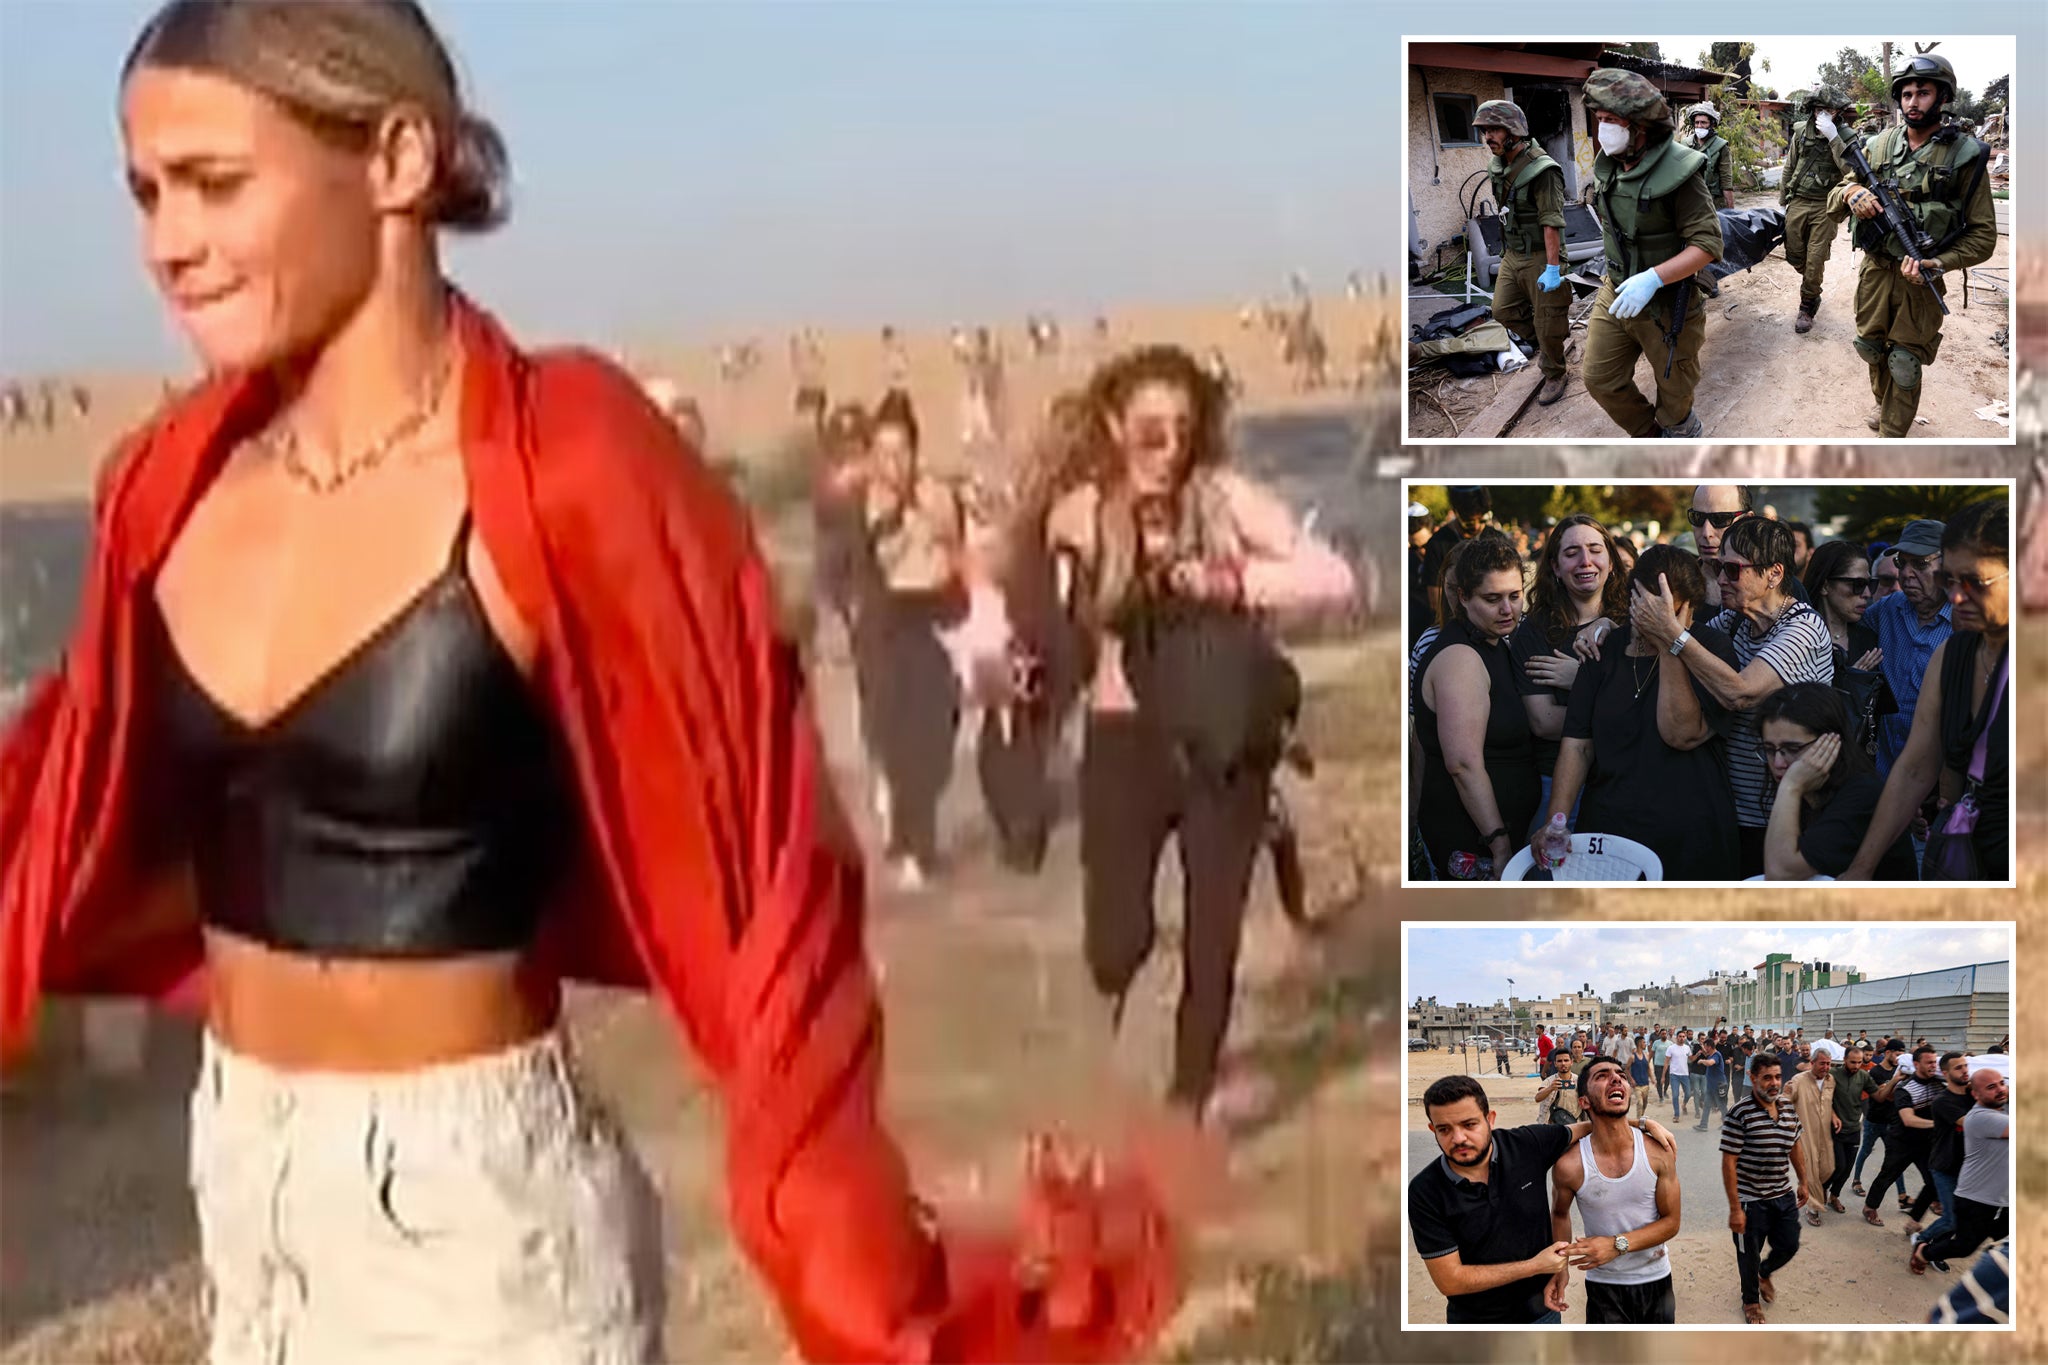 Ravers at the Supernova festival in Negev Dester, southern Israel, flee Hamas militants (main image); Israeli soldiers remove bodies from the kibbutz in Kfar Aza (inset, top) as relatives of the victims mourn (inset middle); Palestinians grieve for victims of airstrikes on Gaza (inset, bottom)